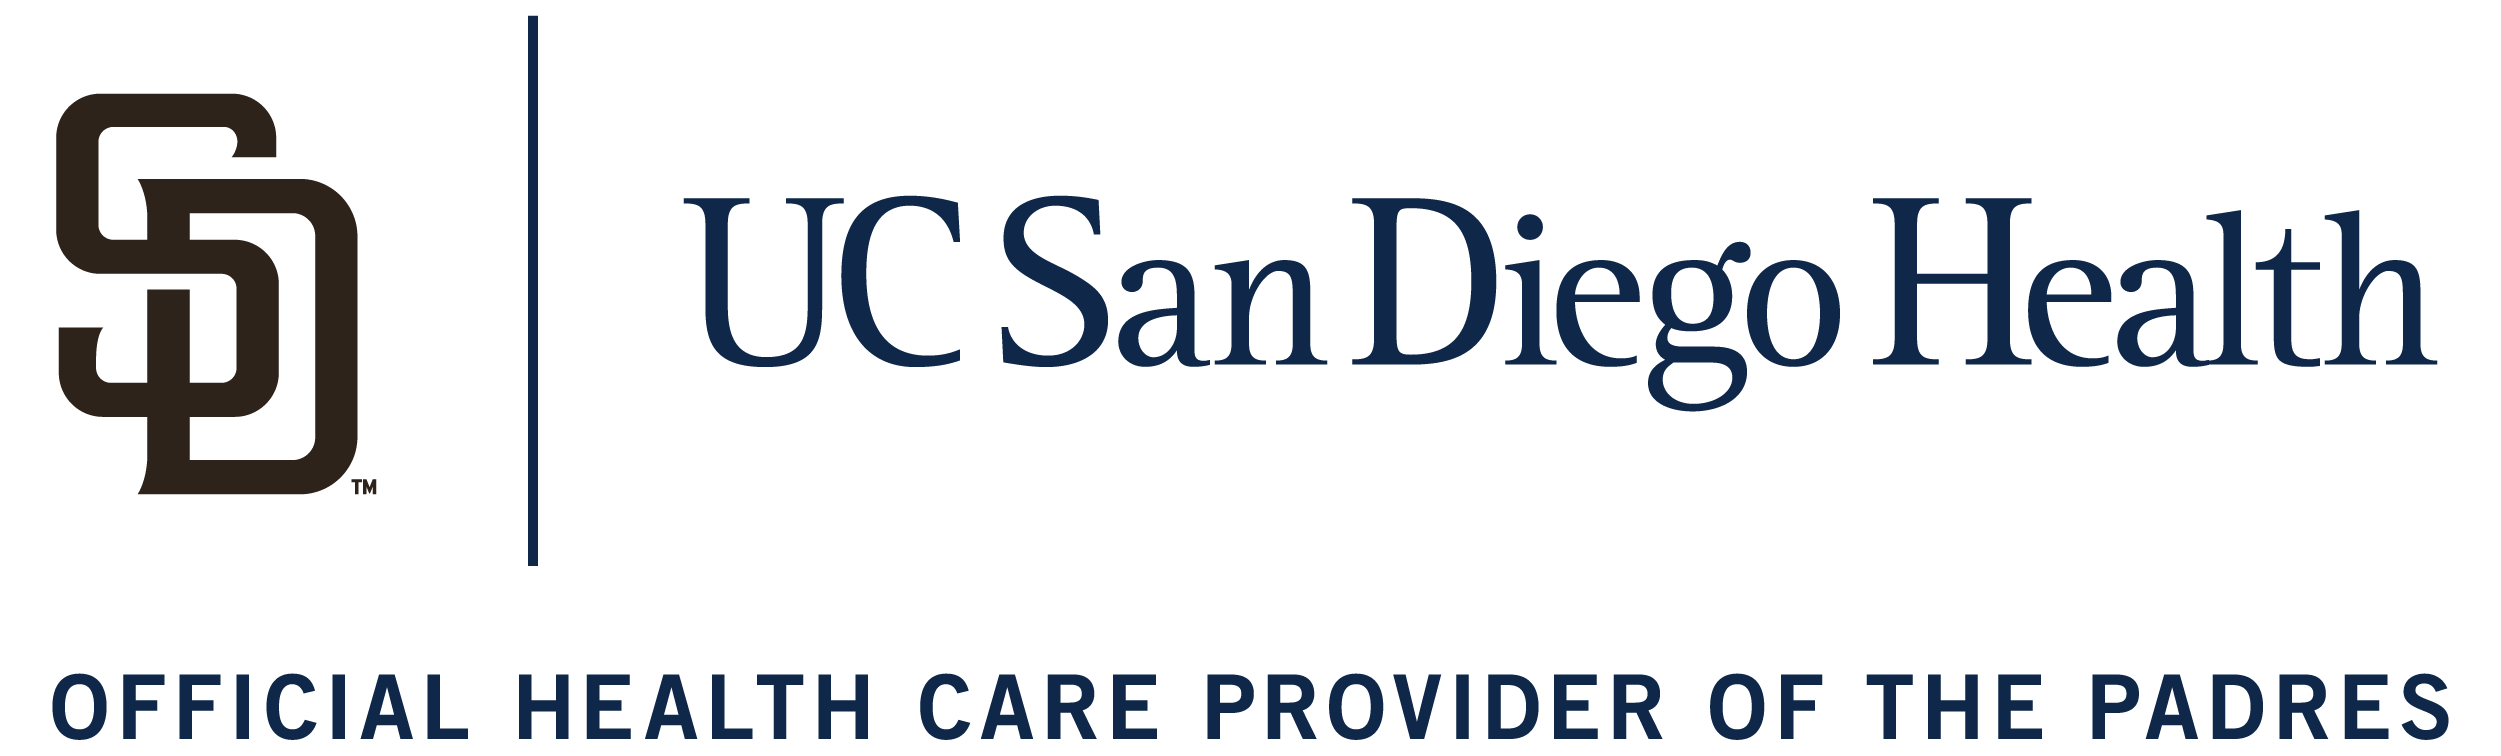 UC San Diego Health iOfficial Health Care Provider of the Padres logo